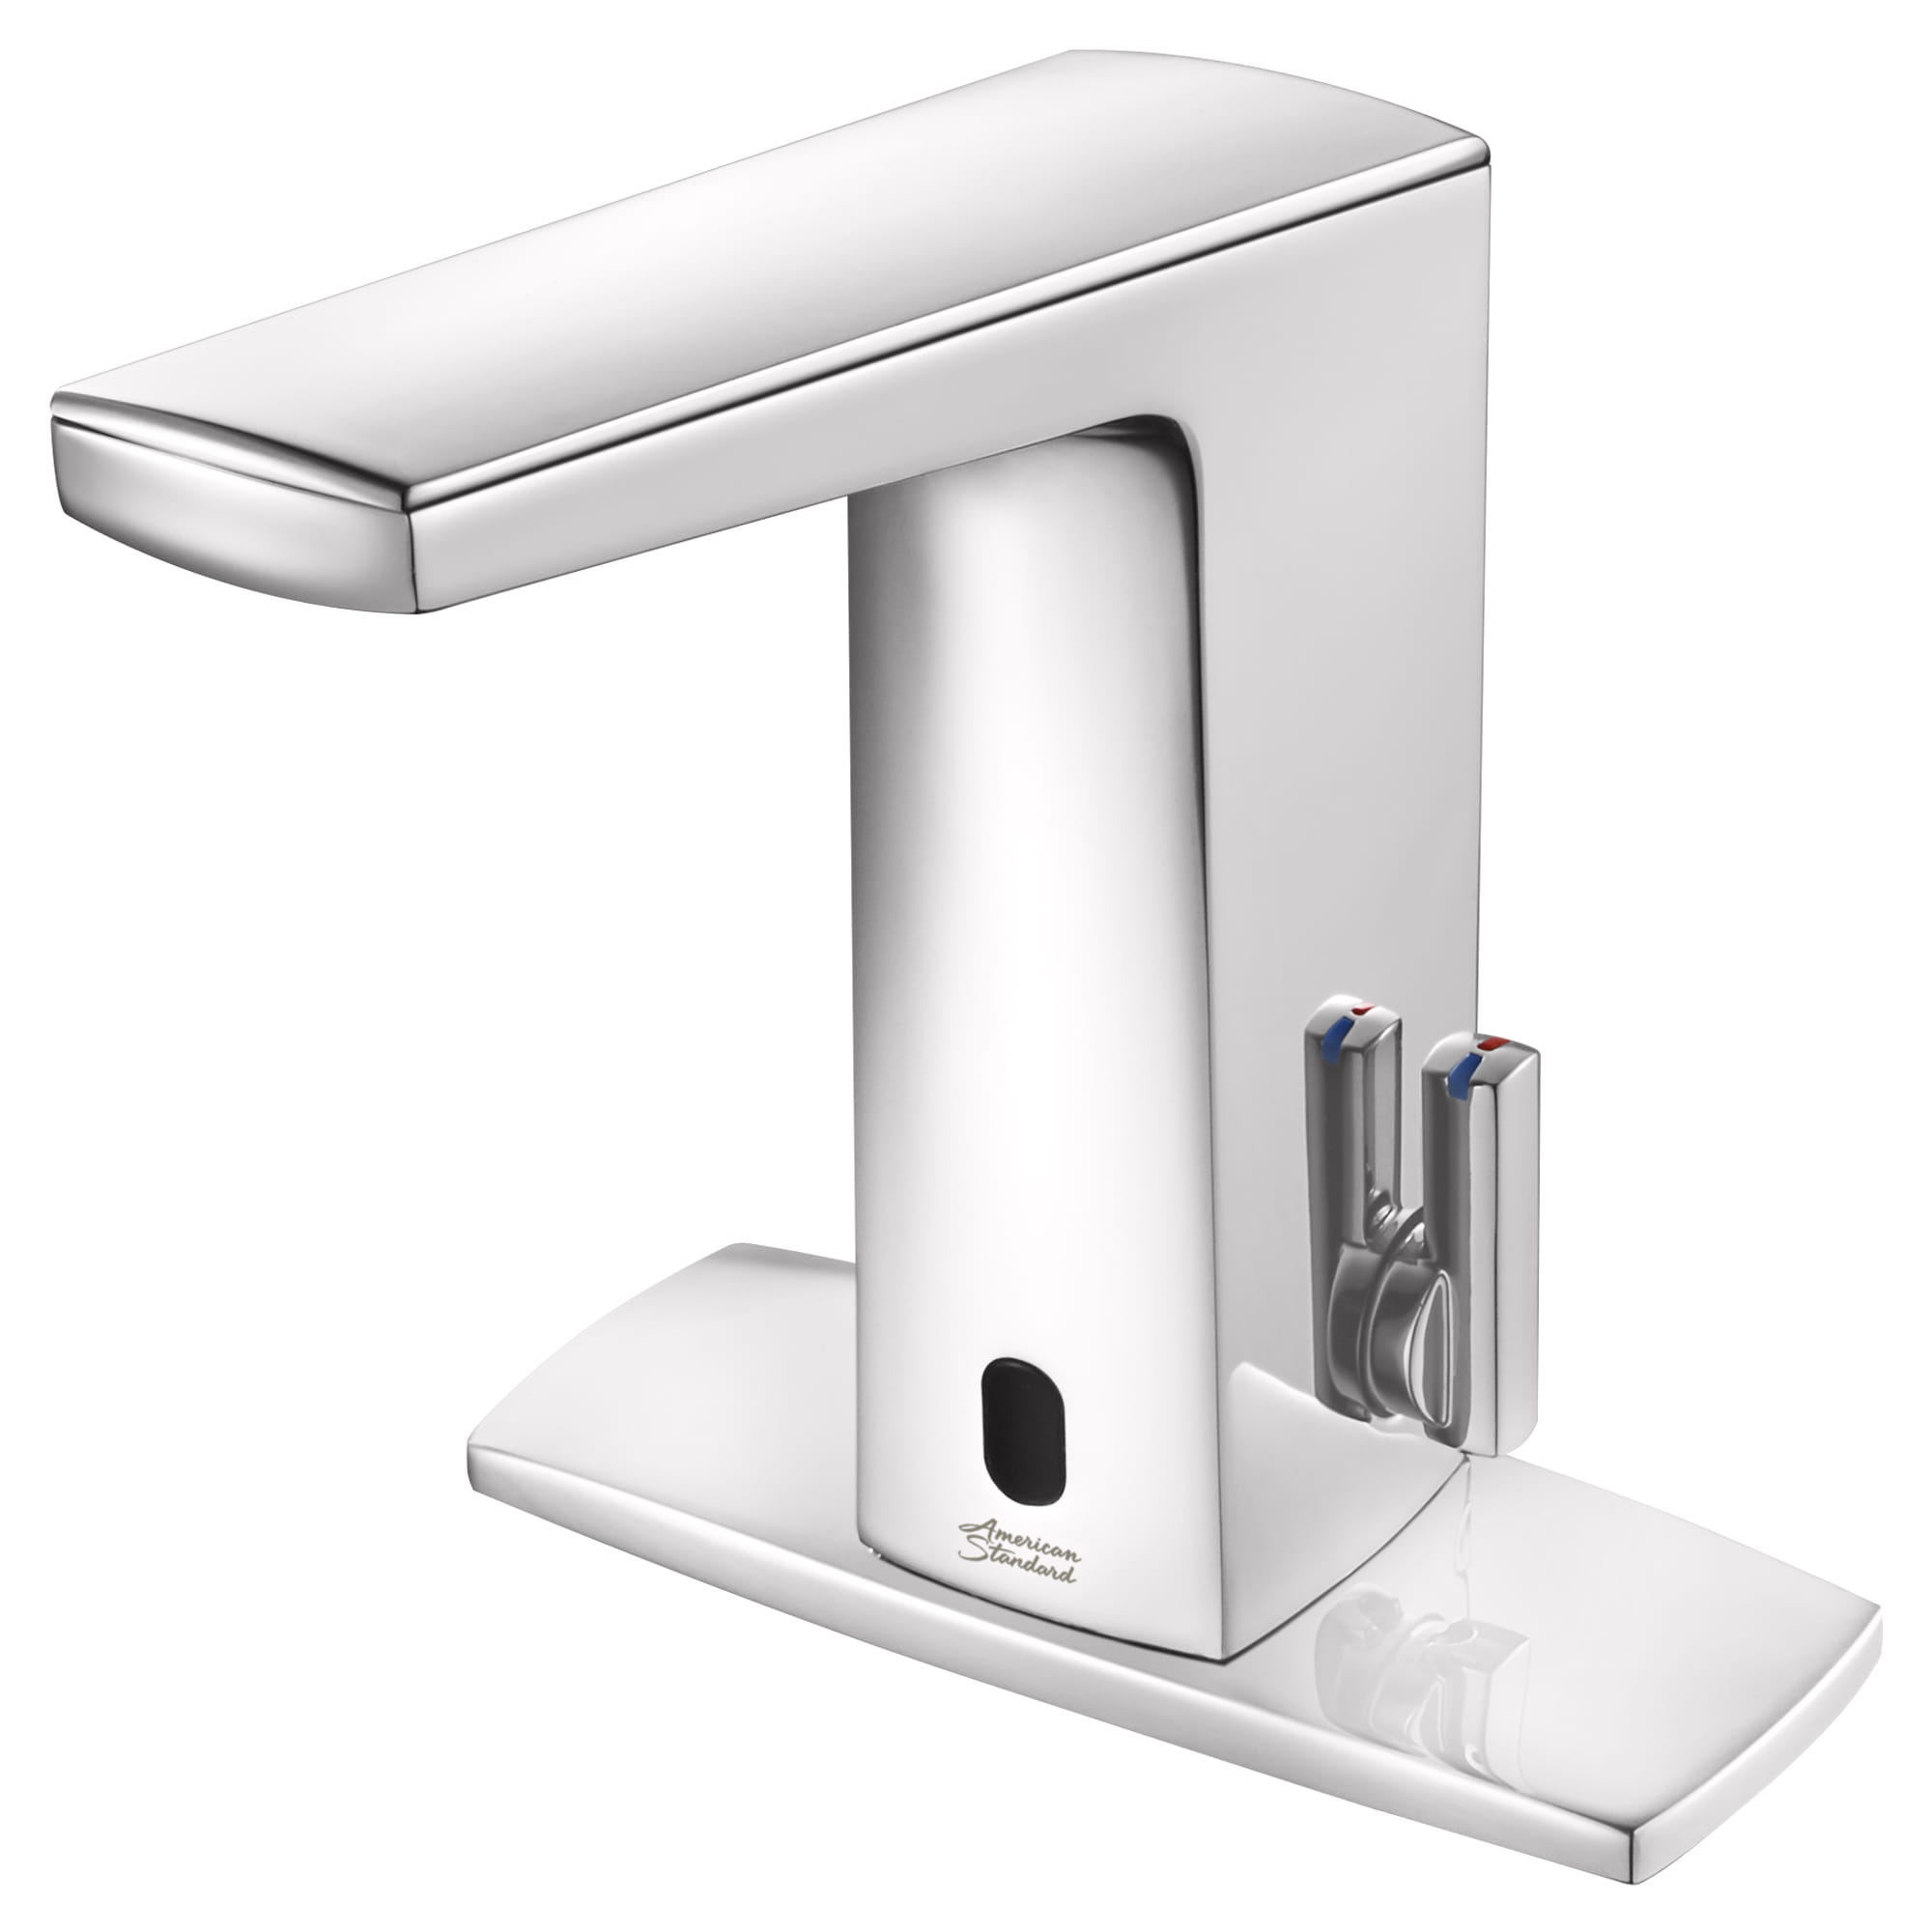 Paradigm Selectronic Touchless Faucet Battery Powered With Above Deck Mixing 035 gpm 13 Lpm CHROME